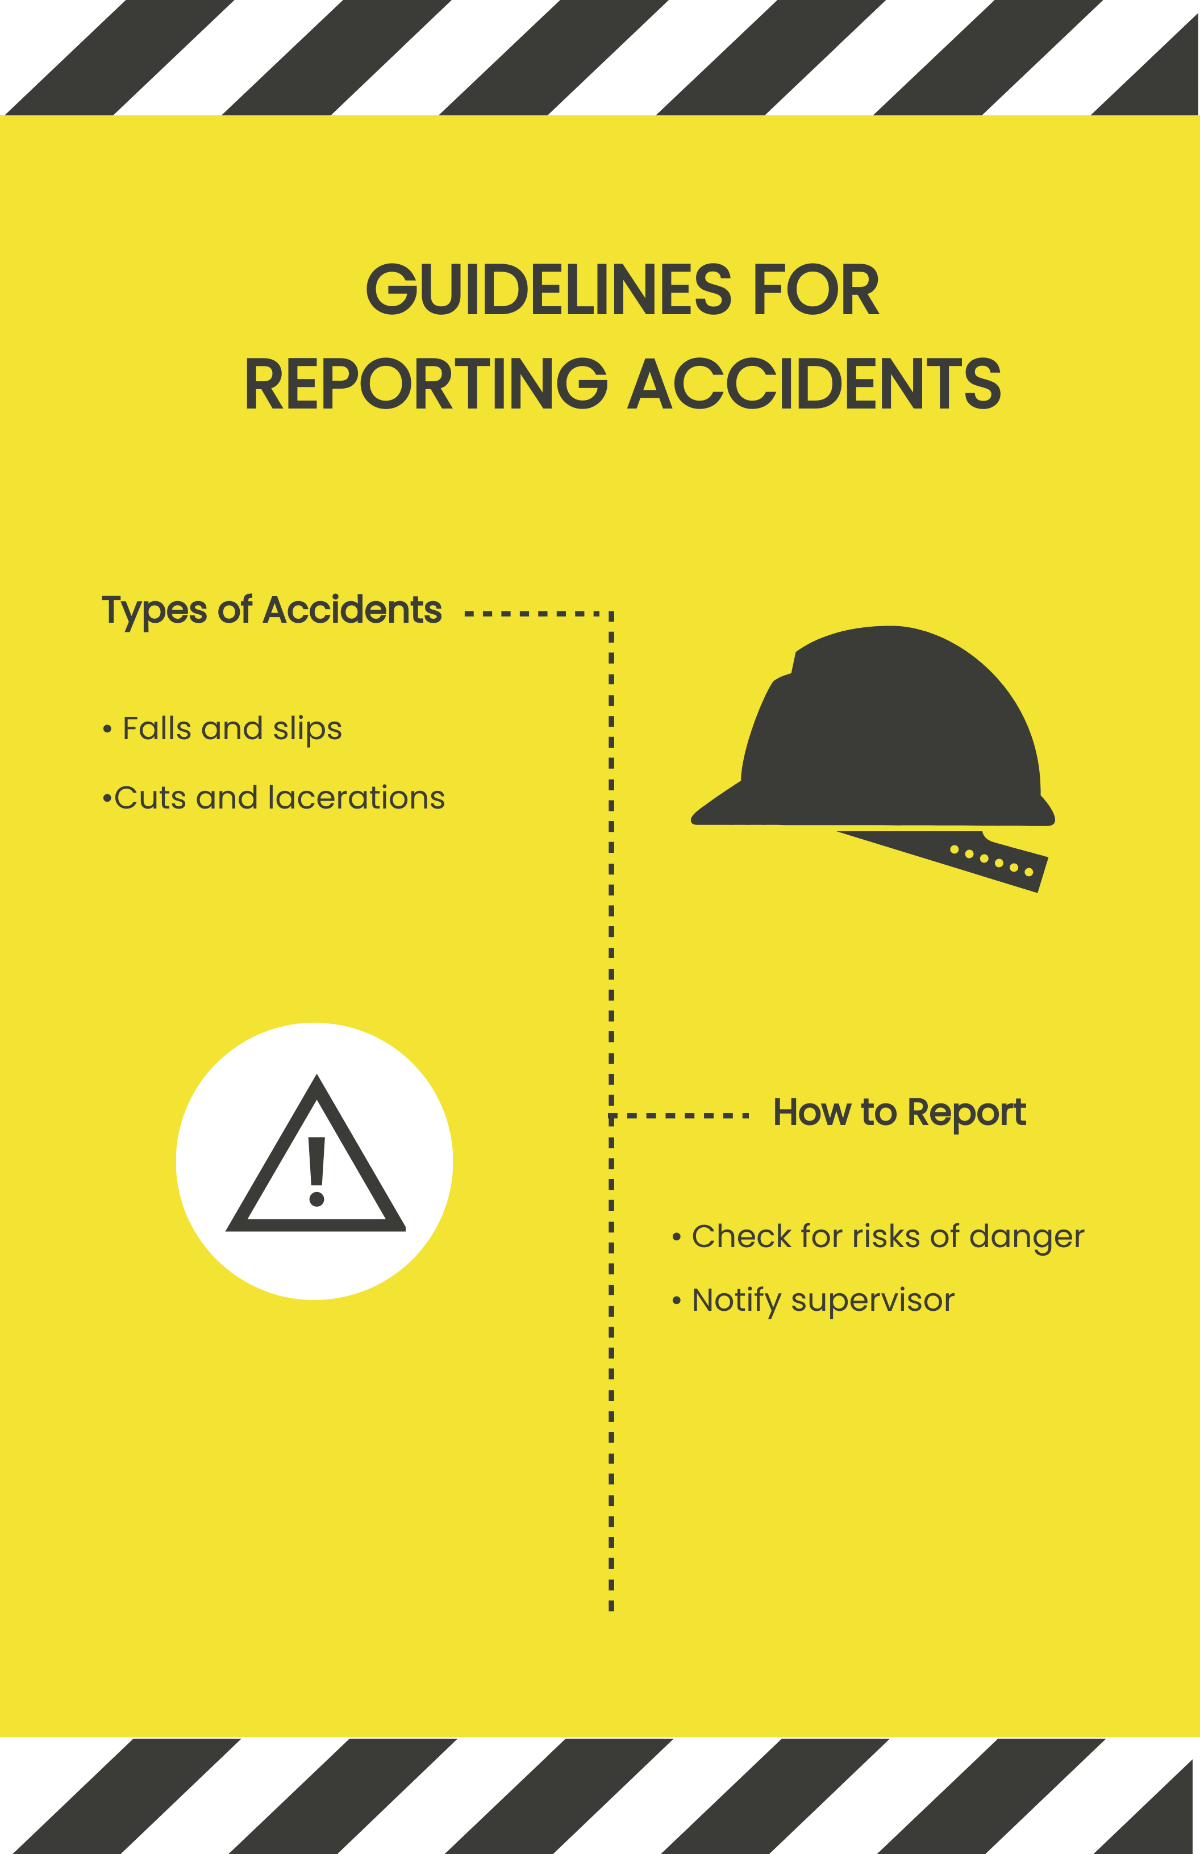 Accident Reporting Poster Template